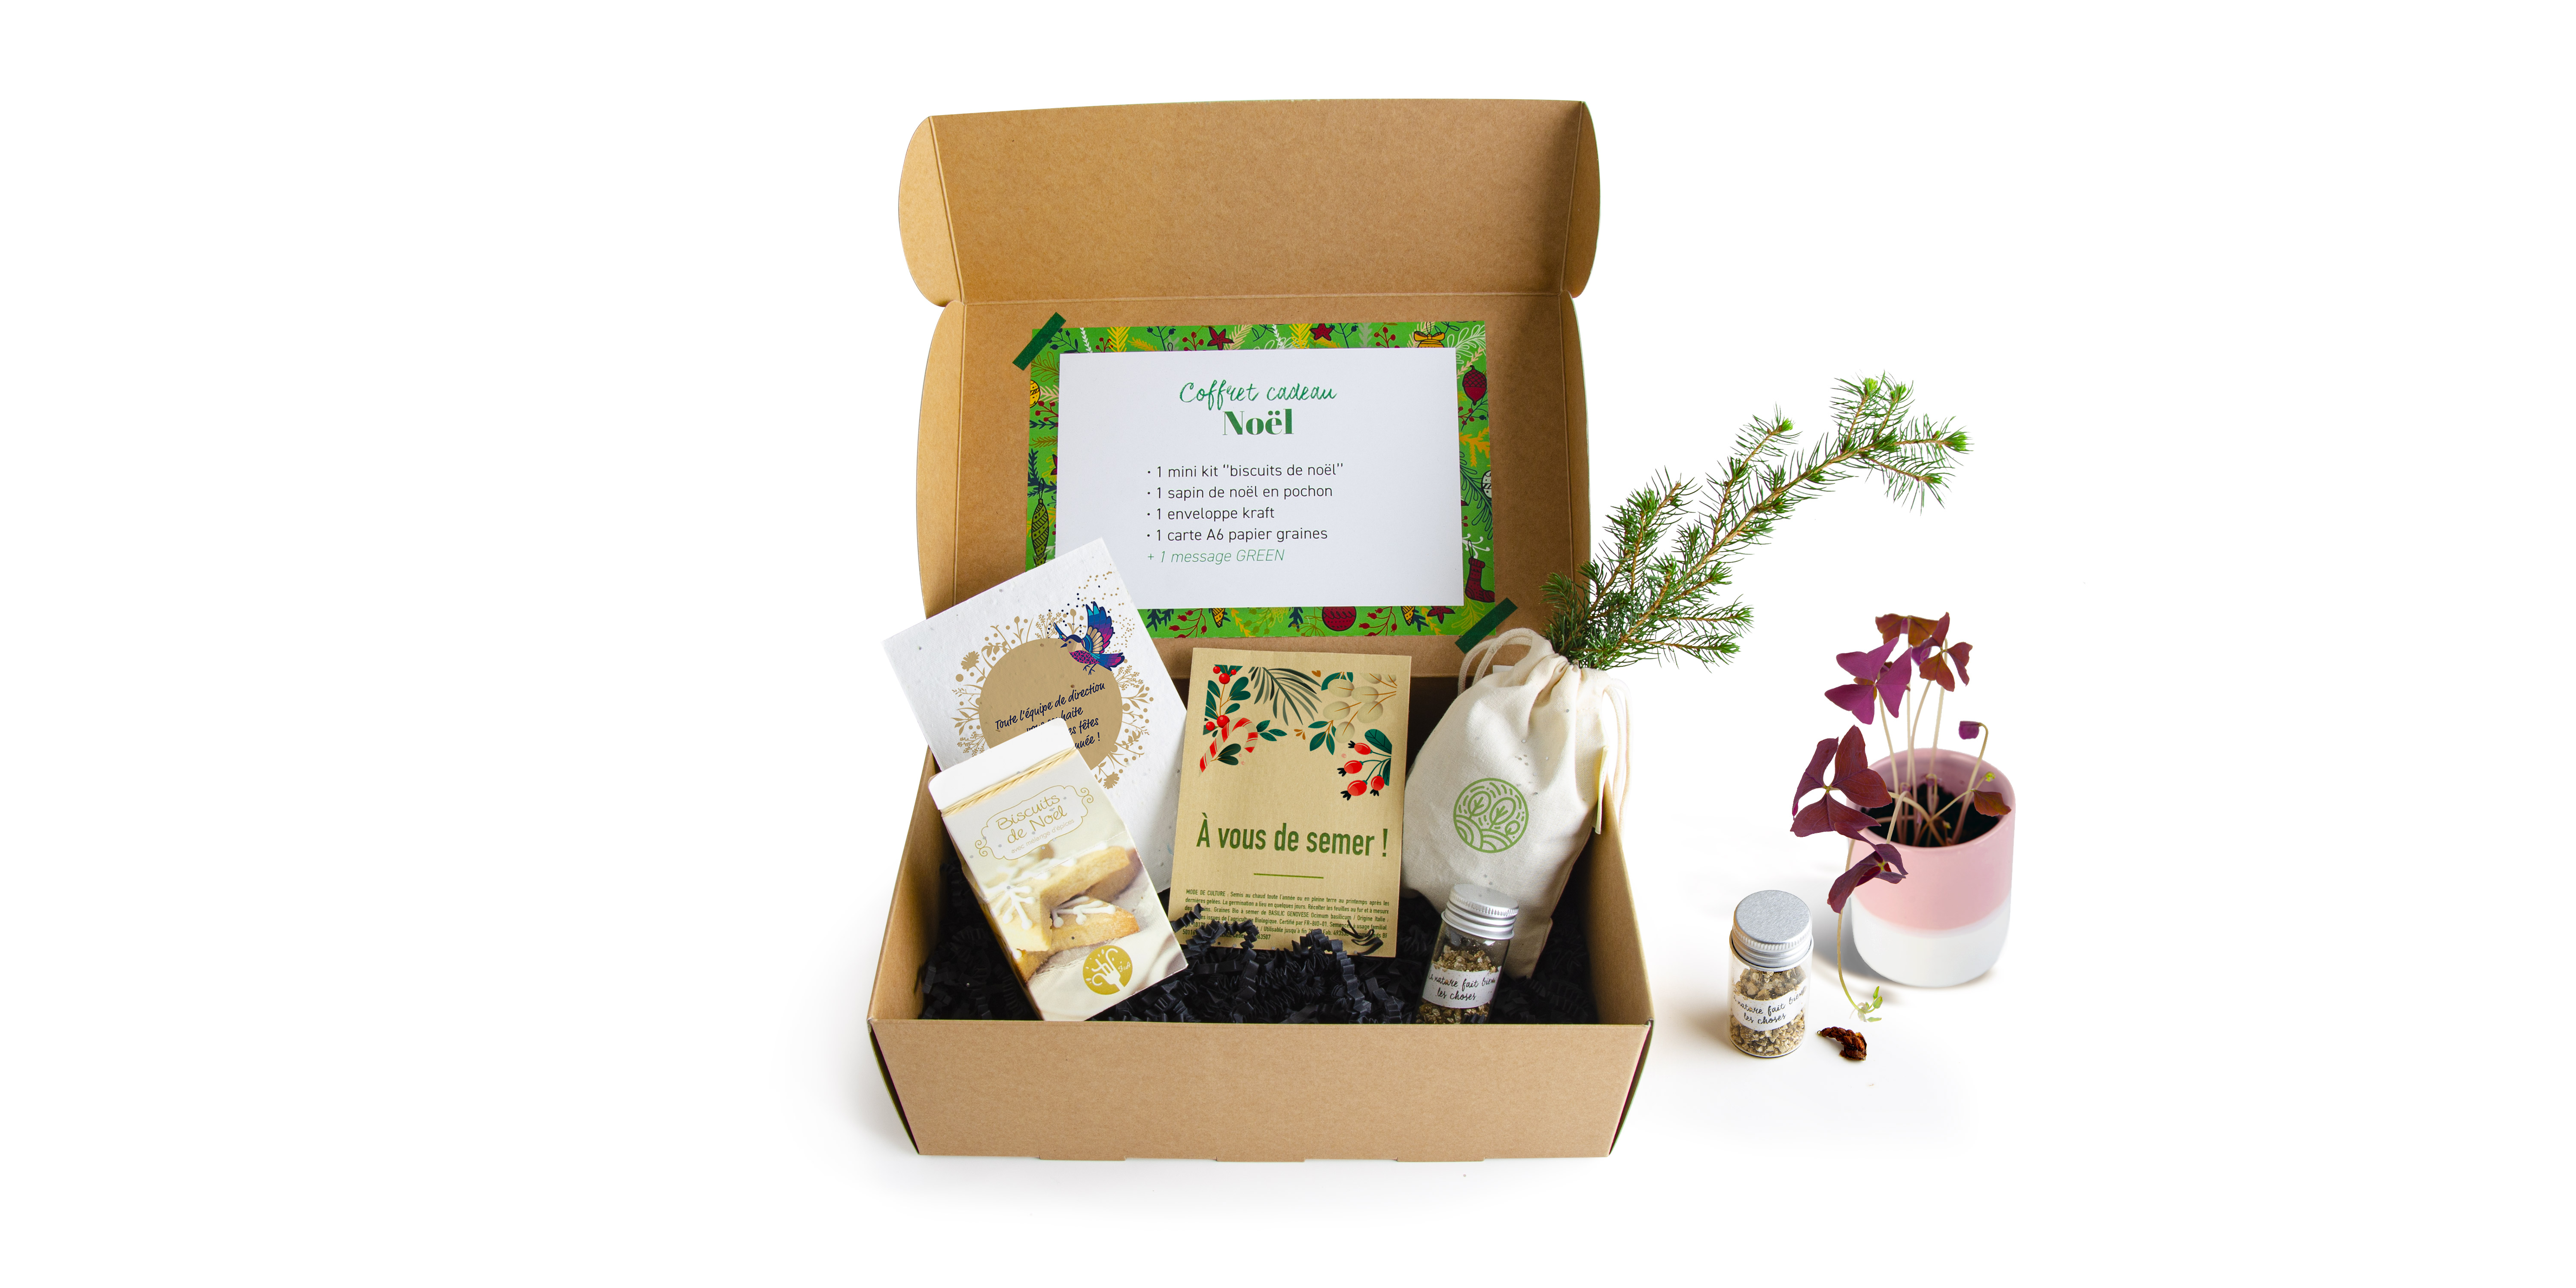 The Christmas Box signed by Promoseeds by Radis et Capucine